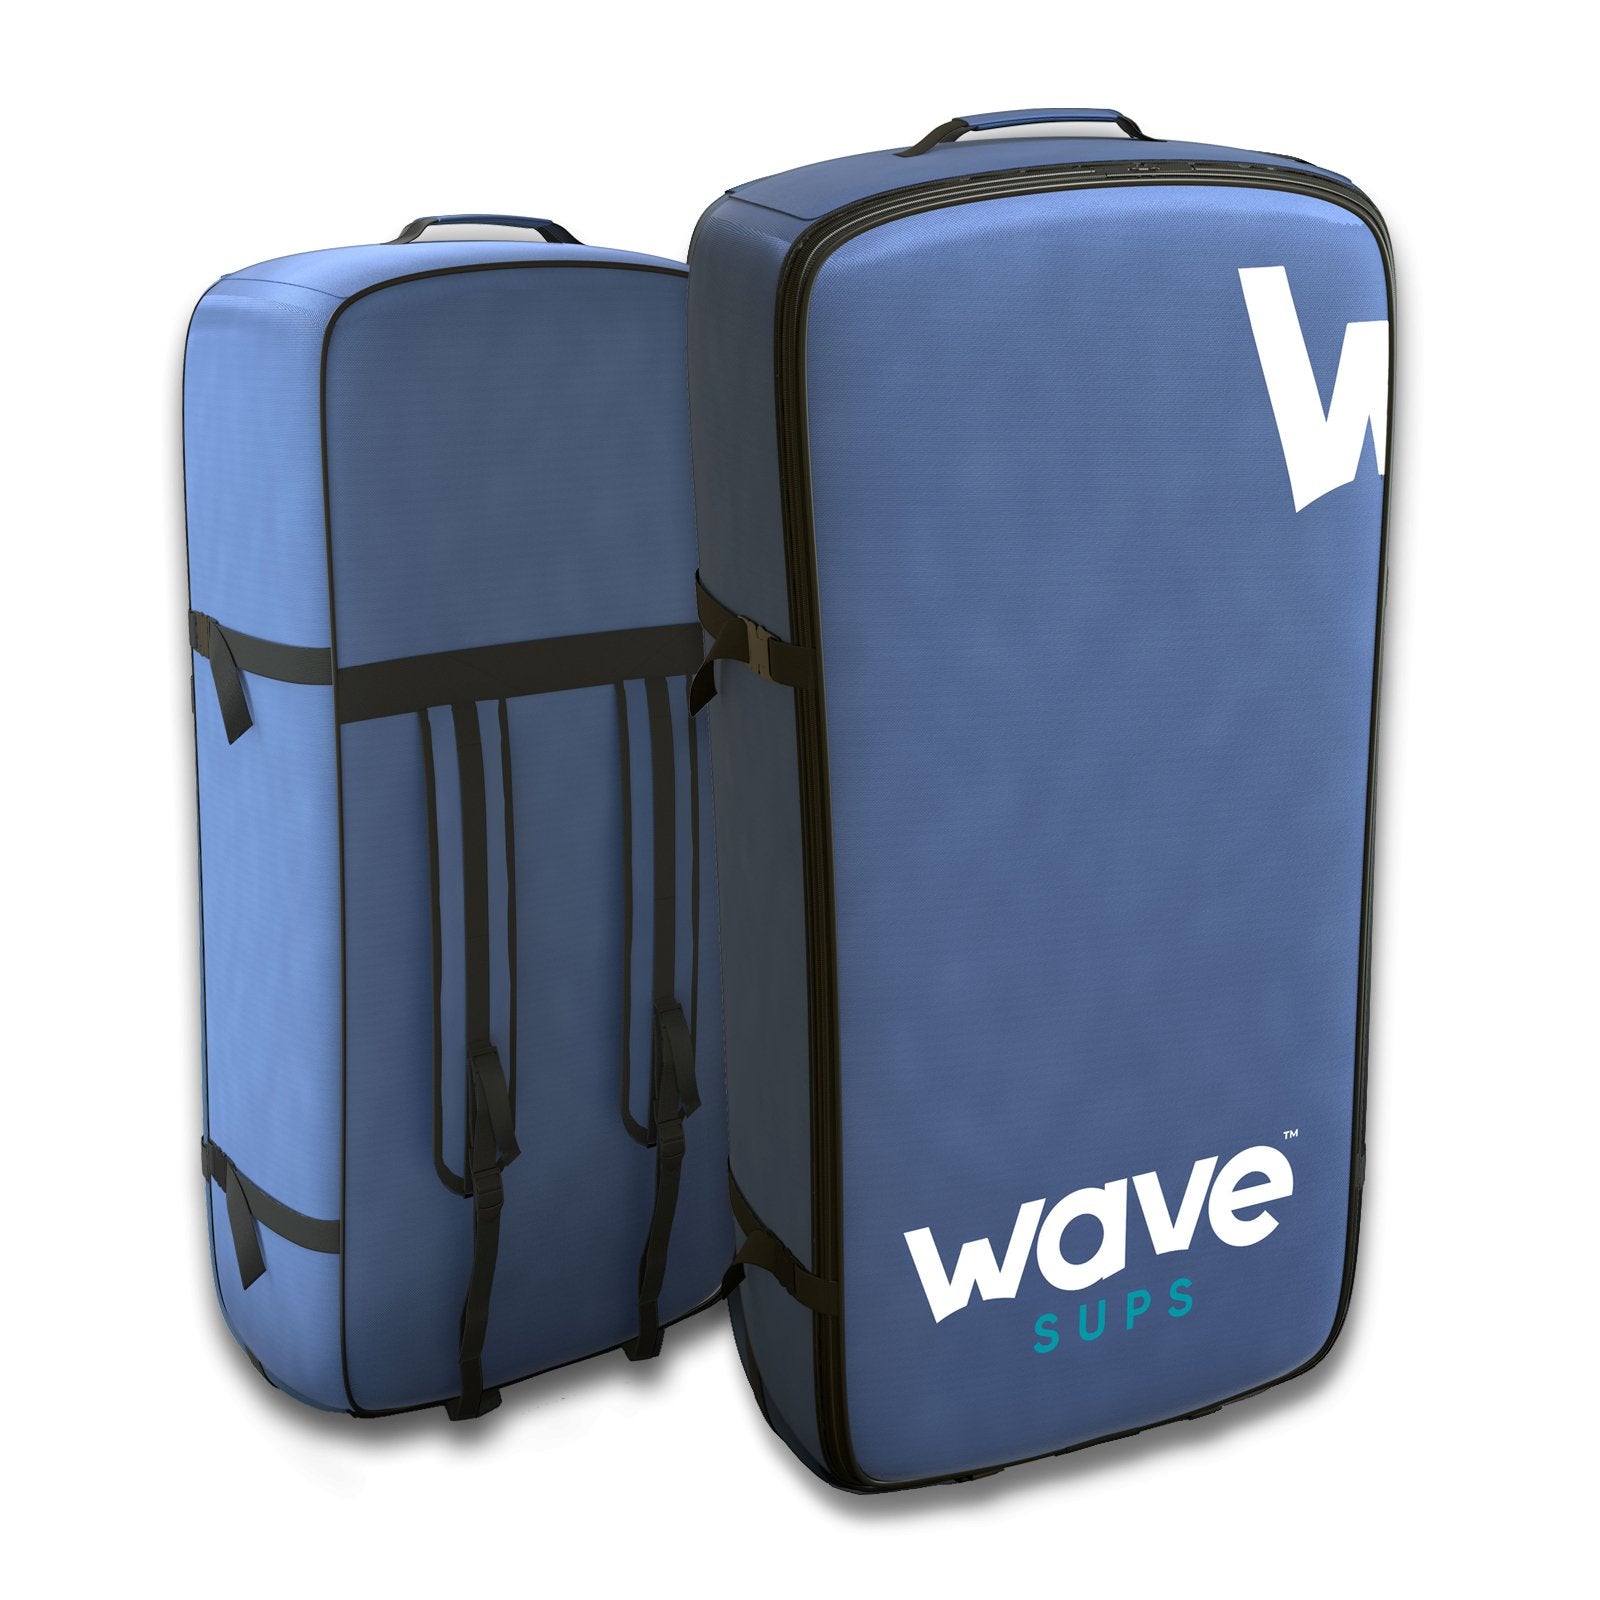 Carry Case | Backpack for Tourer, Cruiser, Woody SUPs | Navy - Wave Sups Inflatable Paddle boards